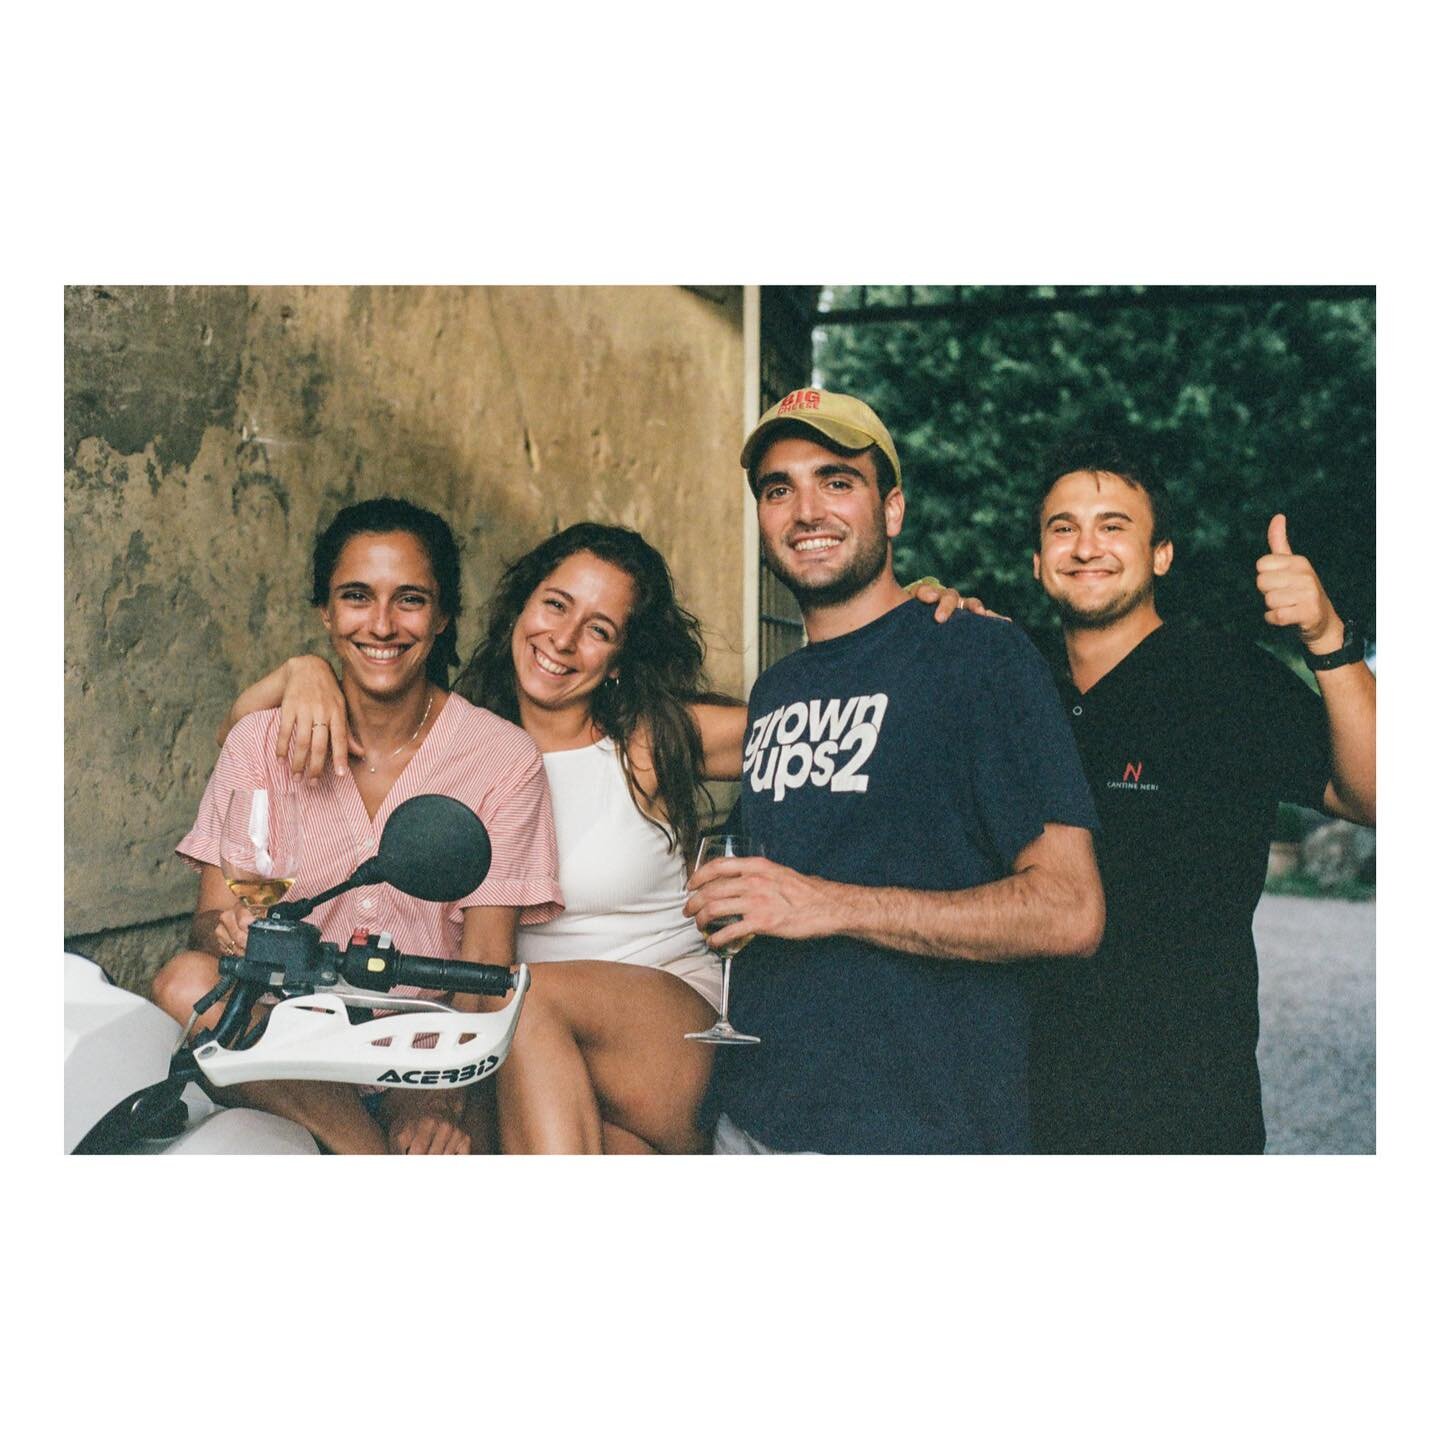 our friends @cantineneri know how to have a good time. stop by for a tour &amp; wine tasting if you&rsquo;re ever in the area 
.
.
.
August 2022
Orvieto, Italy
.
#orvieto #italia #vino #cantineneri #workaway #workawayadventure #kodakportra #kodakport